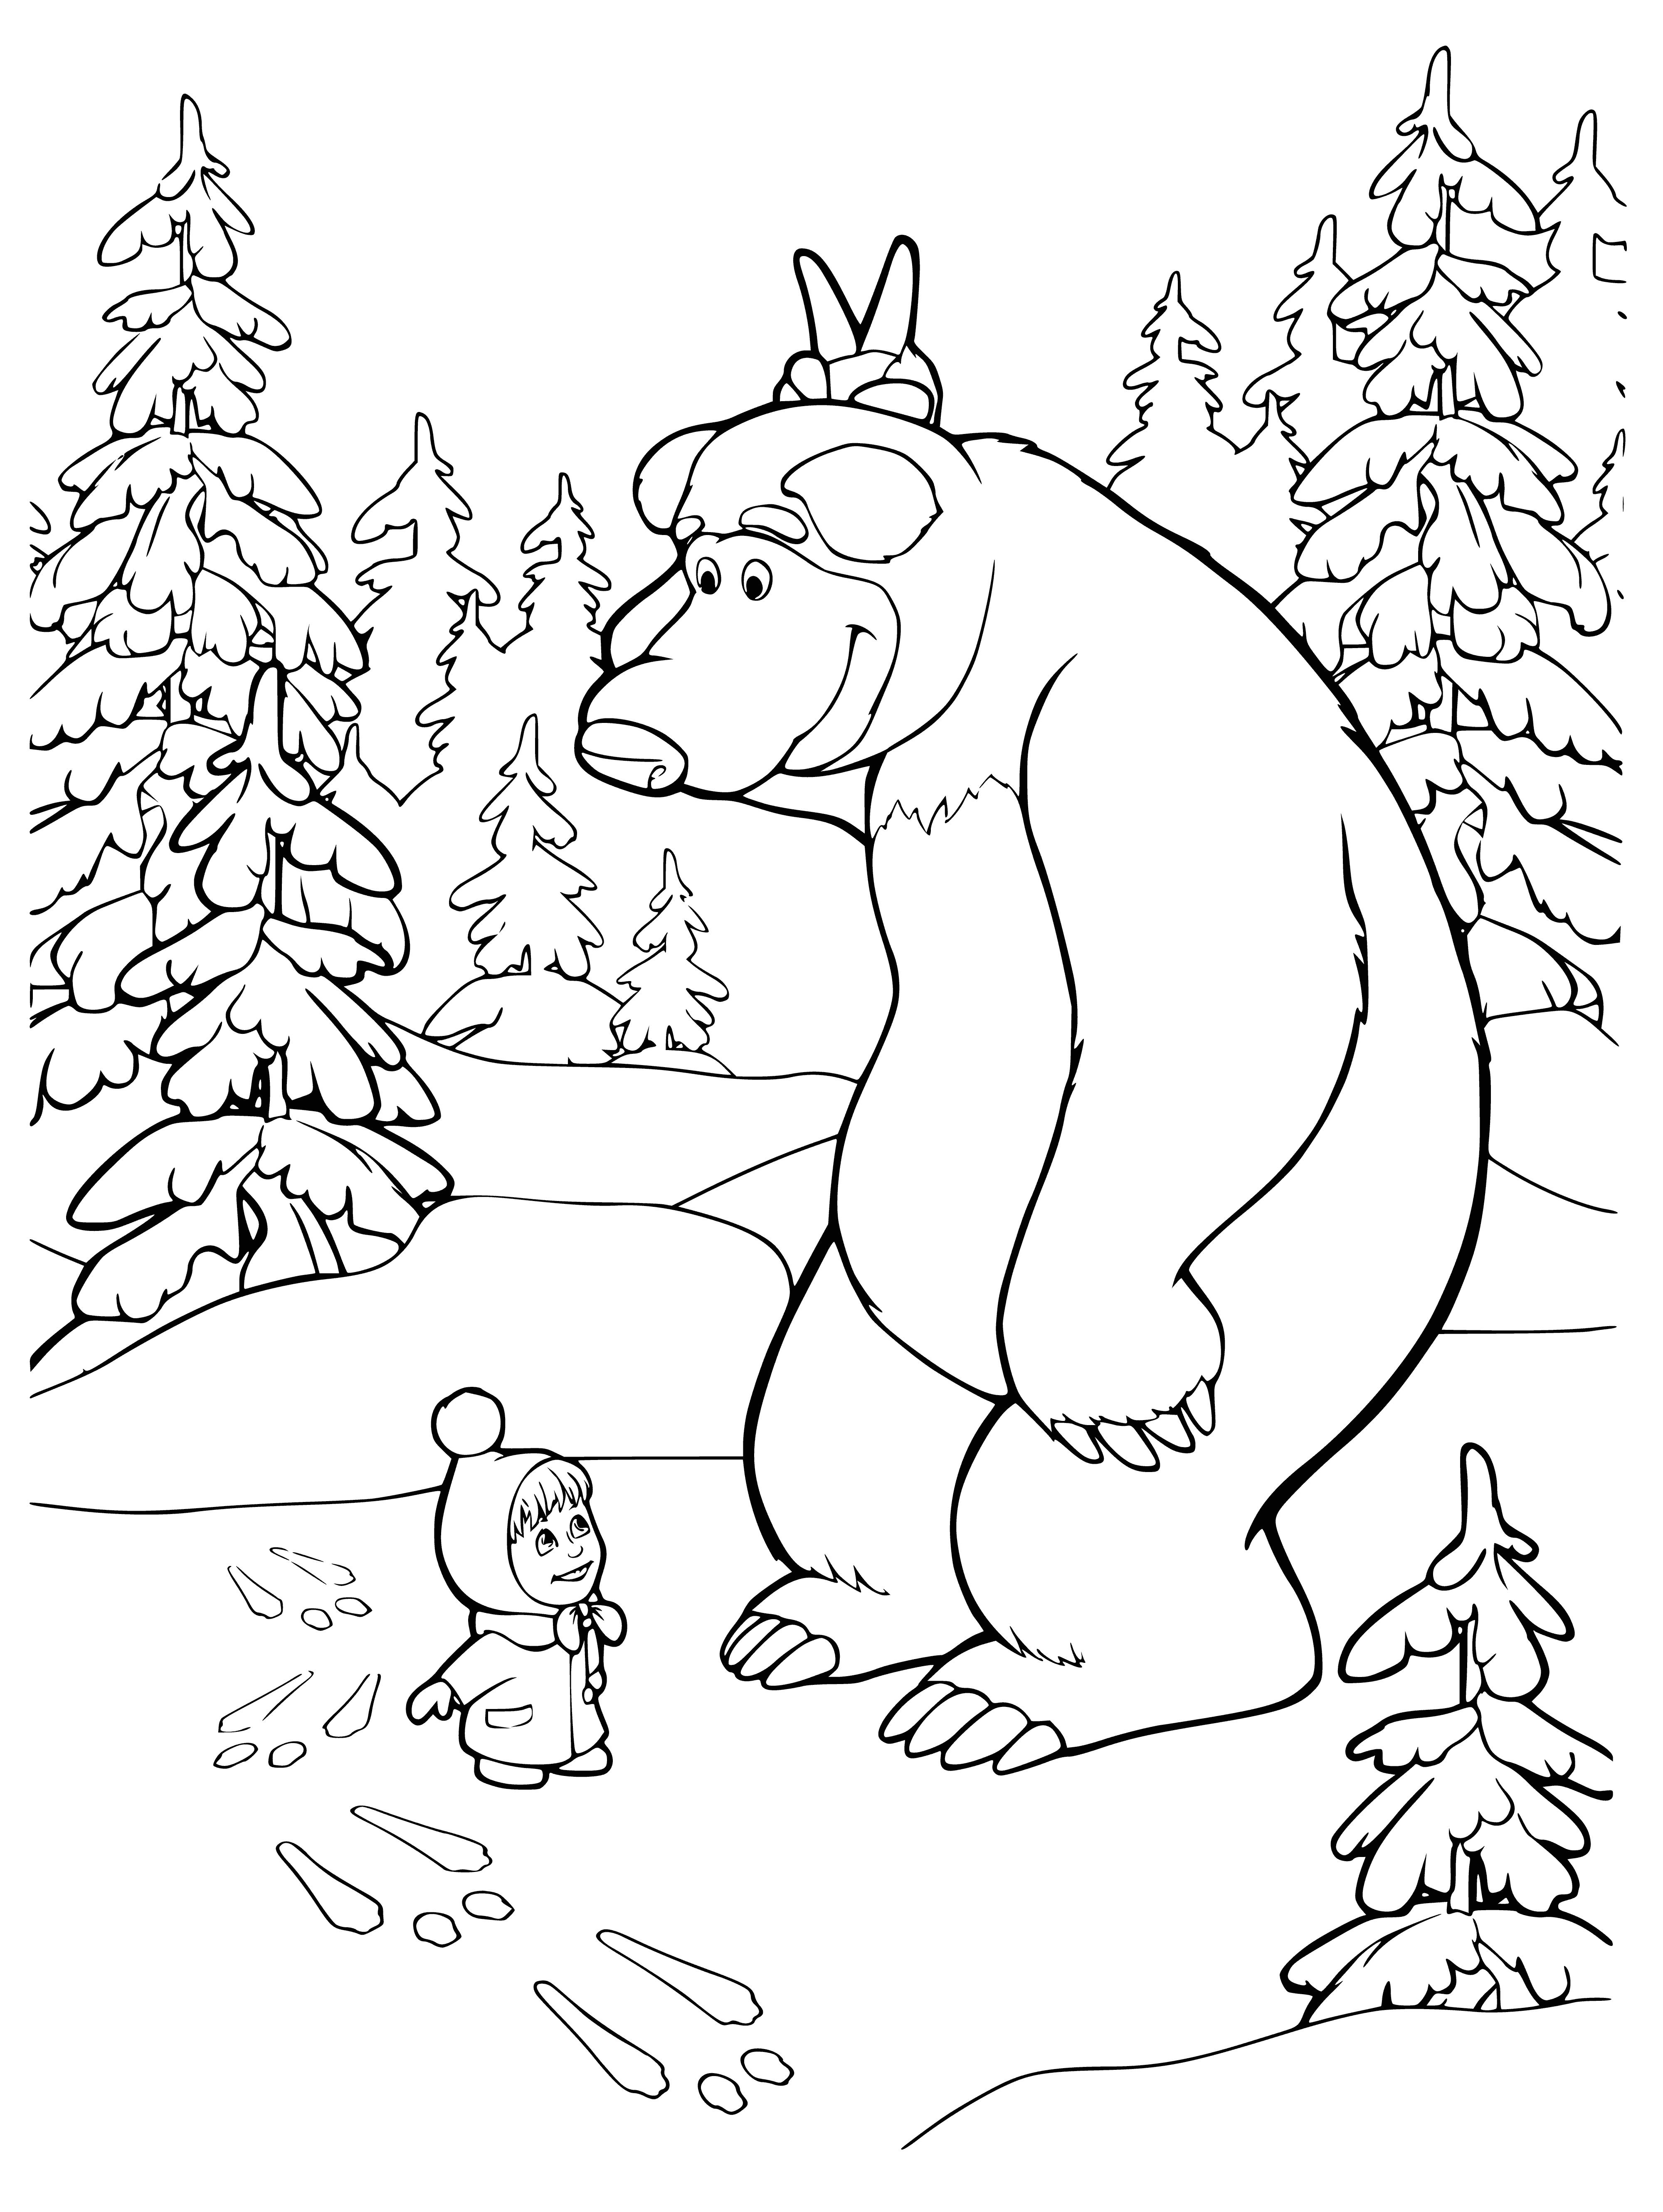 coloring page: Masha is holding a stick and facing a menacing wolf; she looks scared.